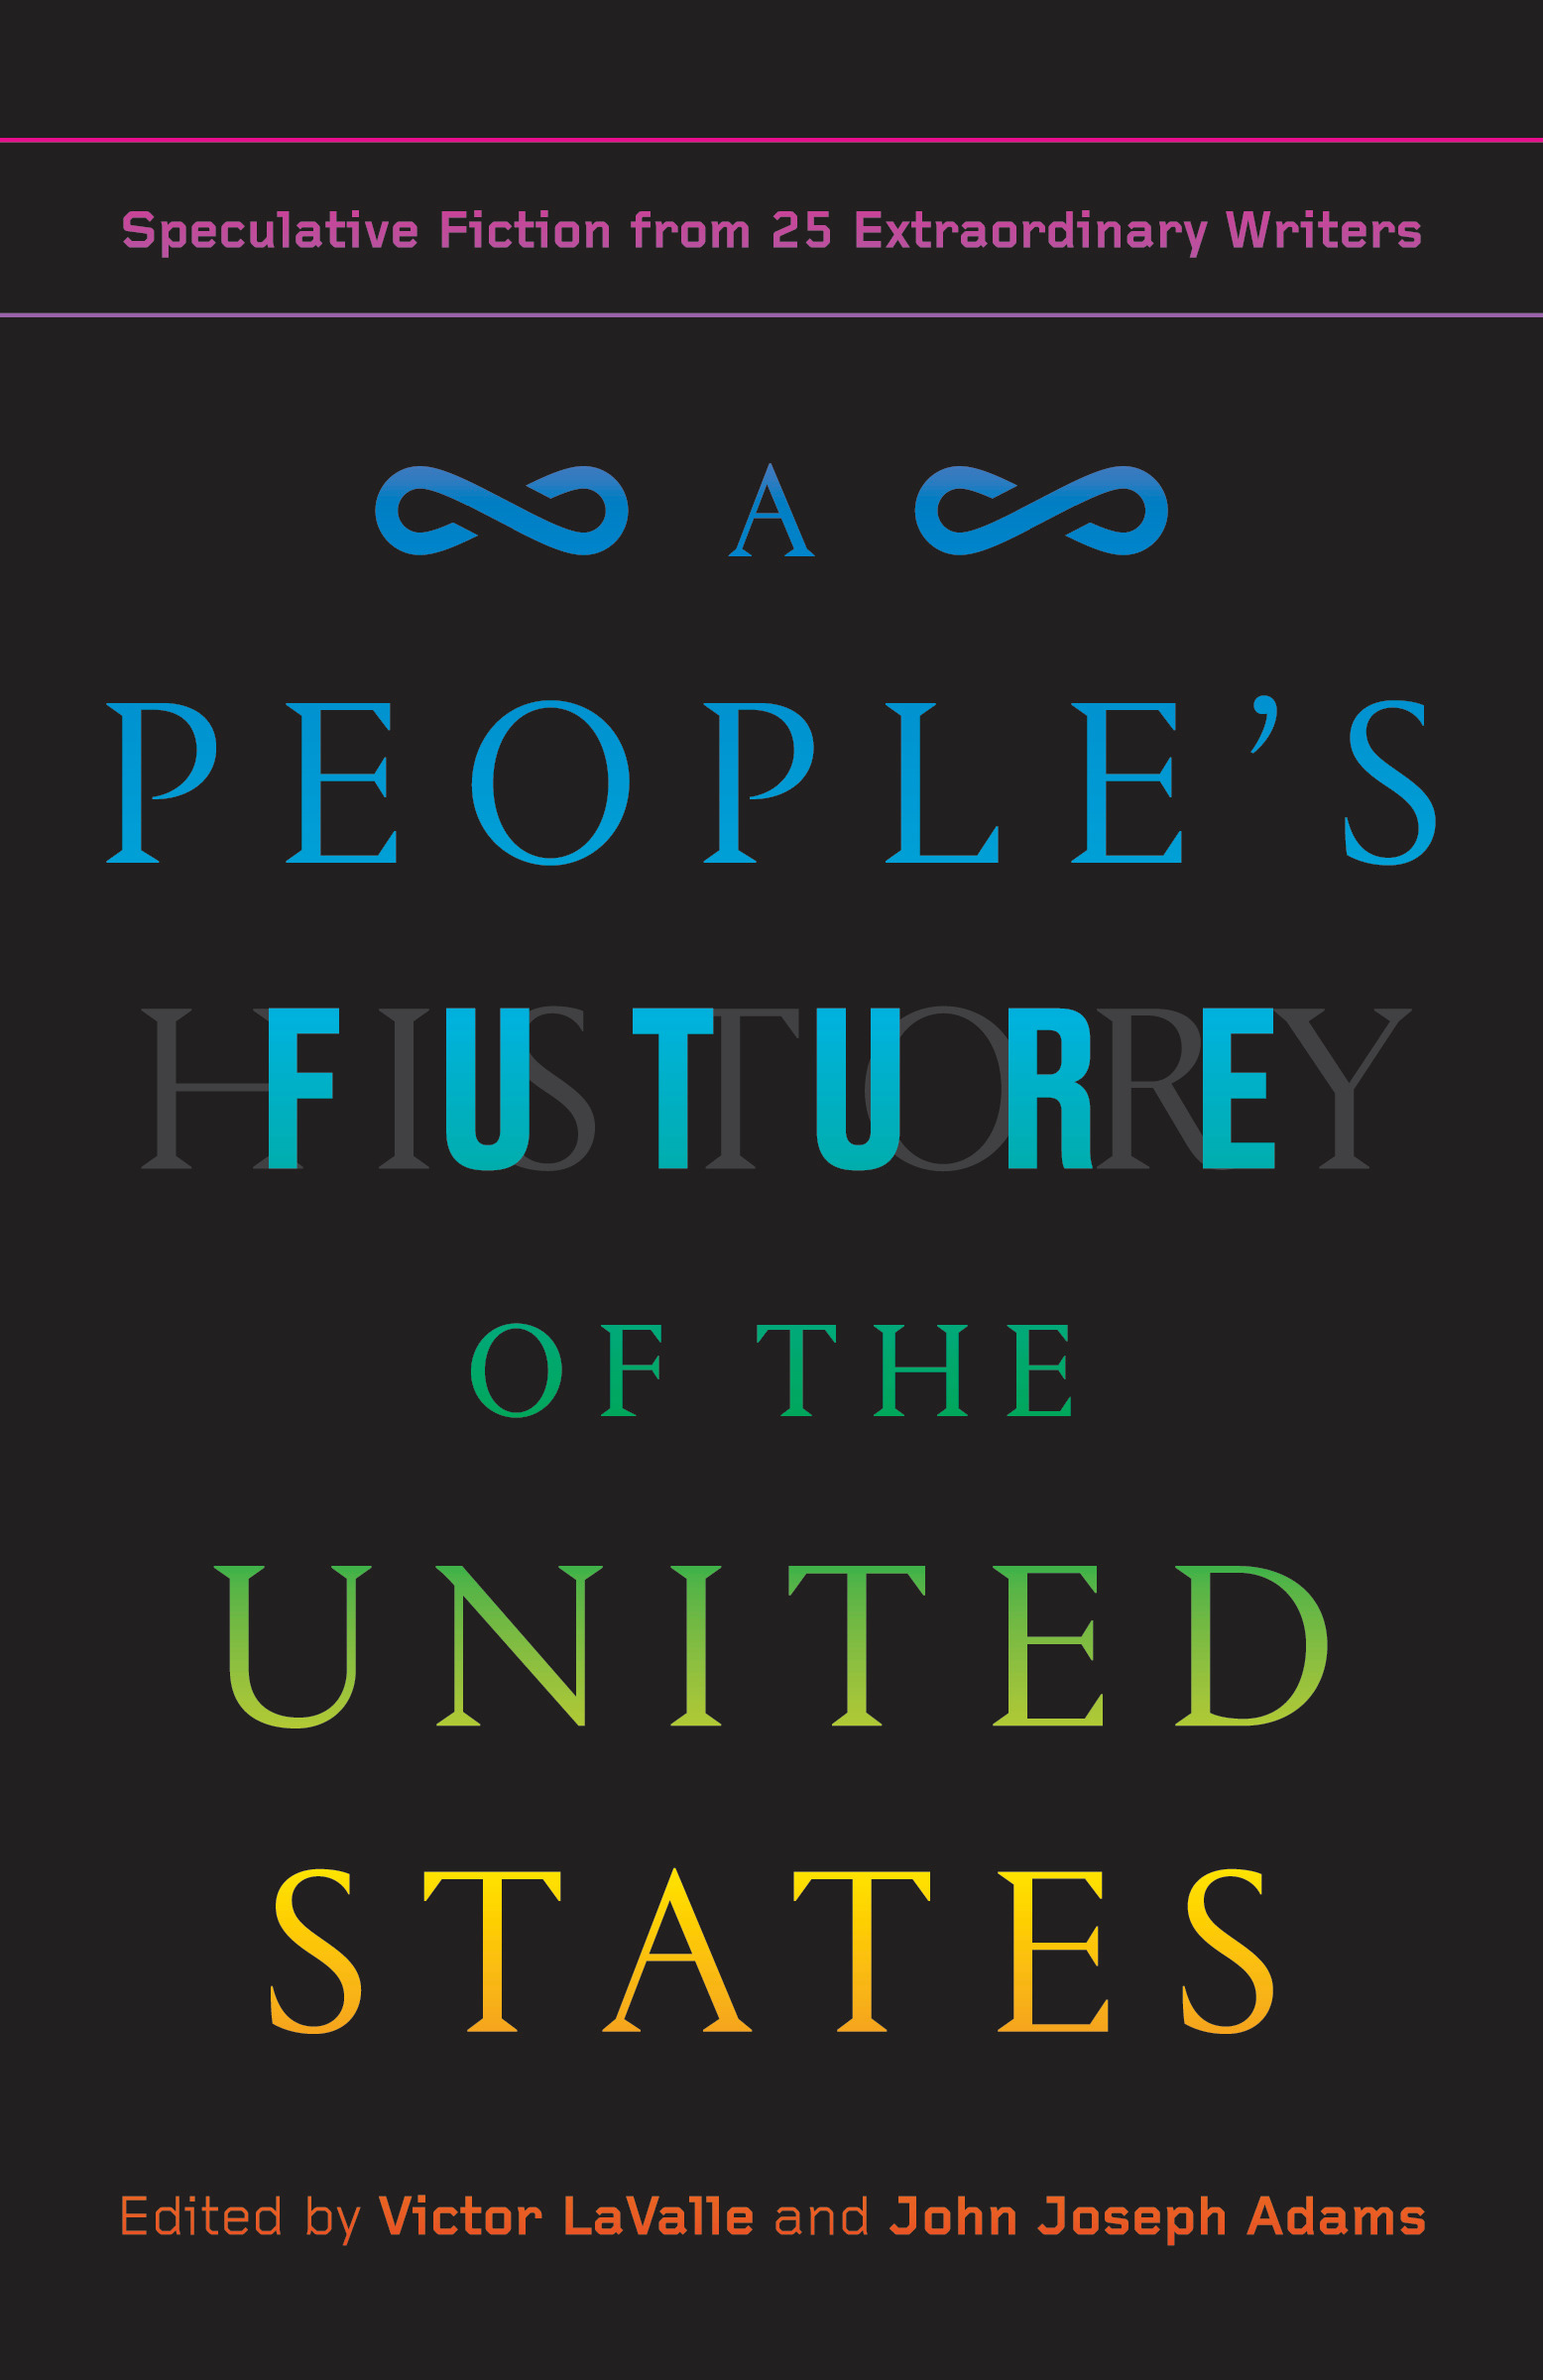 Charles Yu, Charlie Jane Anders, Lesley Nneka Arimah: A People's Future of the United States (Paperback, 2019, One World, Random House Publishing Group)